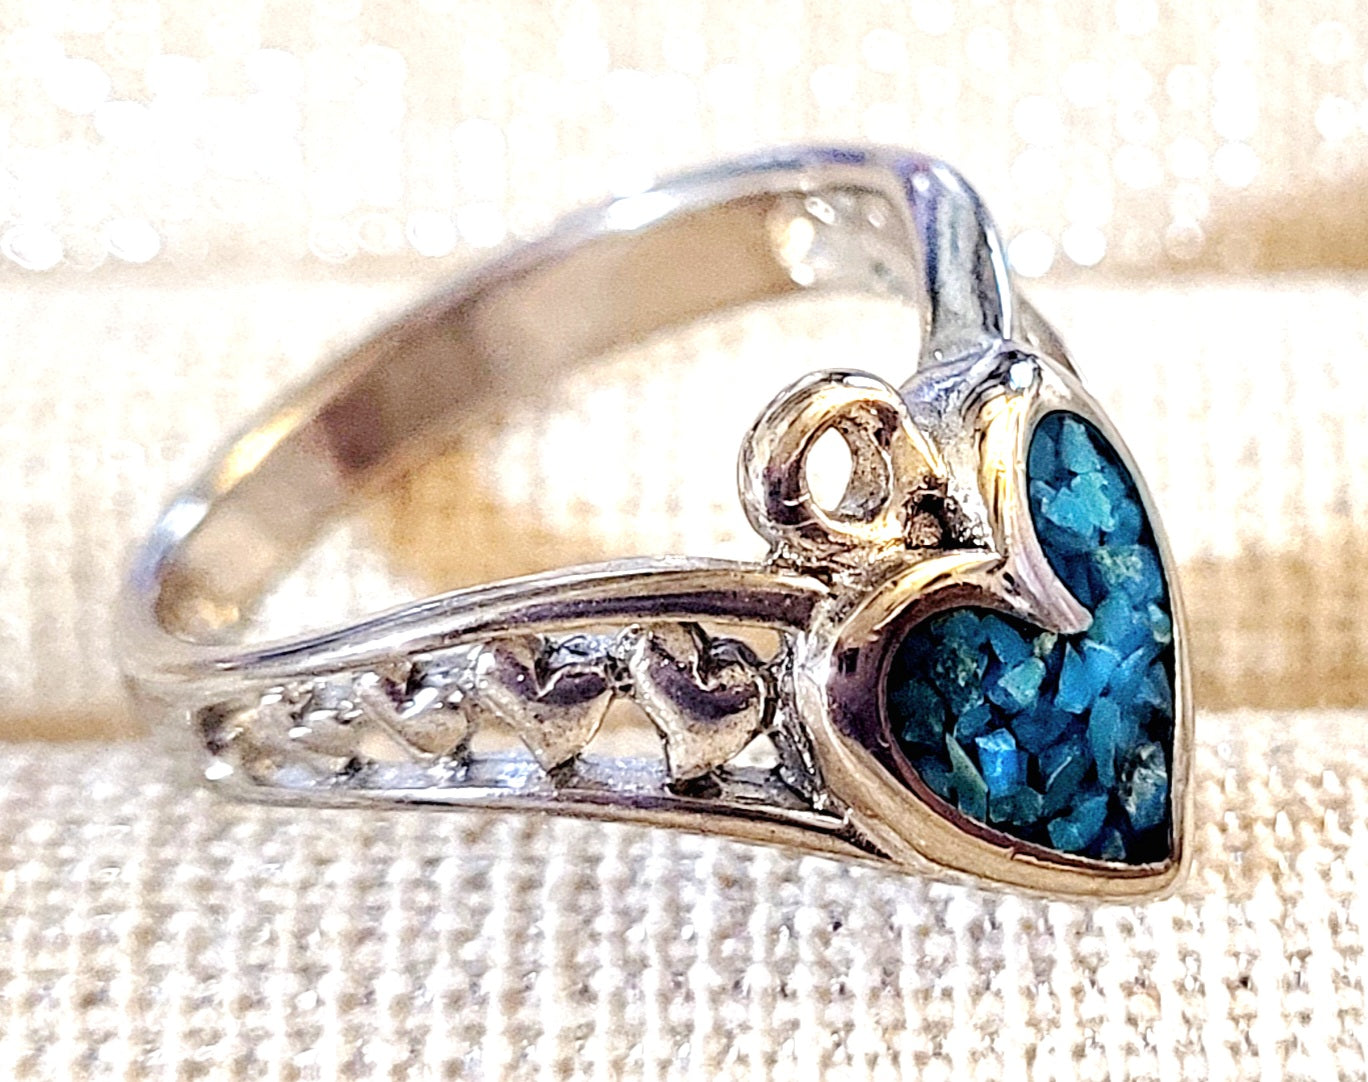 Sweet Silvertone Turquoise Single Heart Inlay Ring (size 5.5)